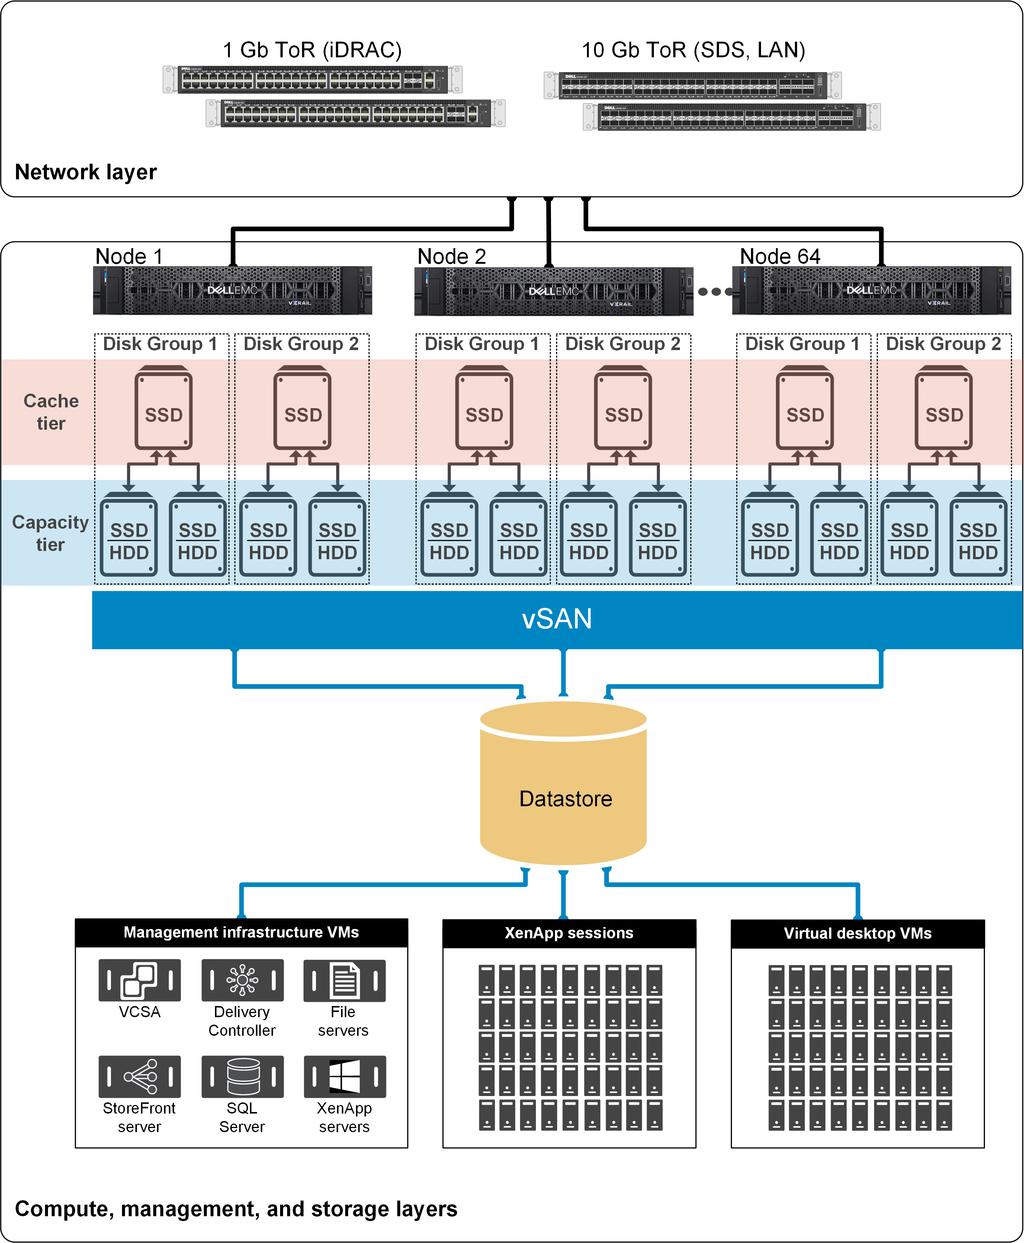 Solution architecture Architecture overview This section provides an architecture overview and guidance on managing and scaling a Citrix Virtual Apps and Desktops environment on Dell EMC VxRail